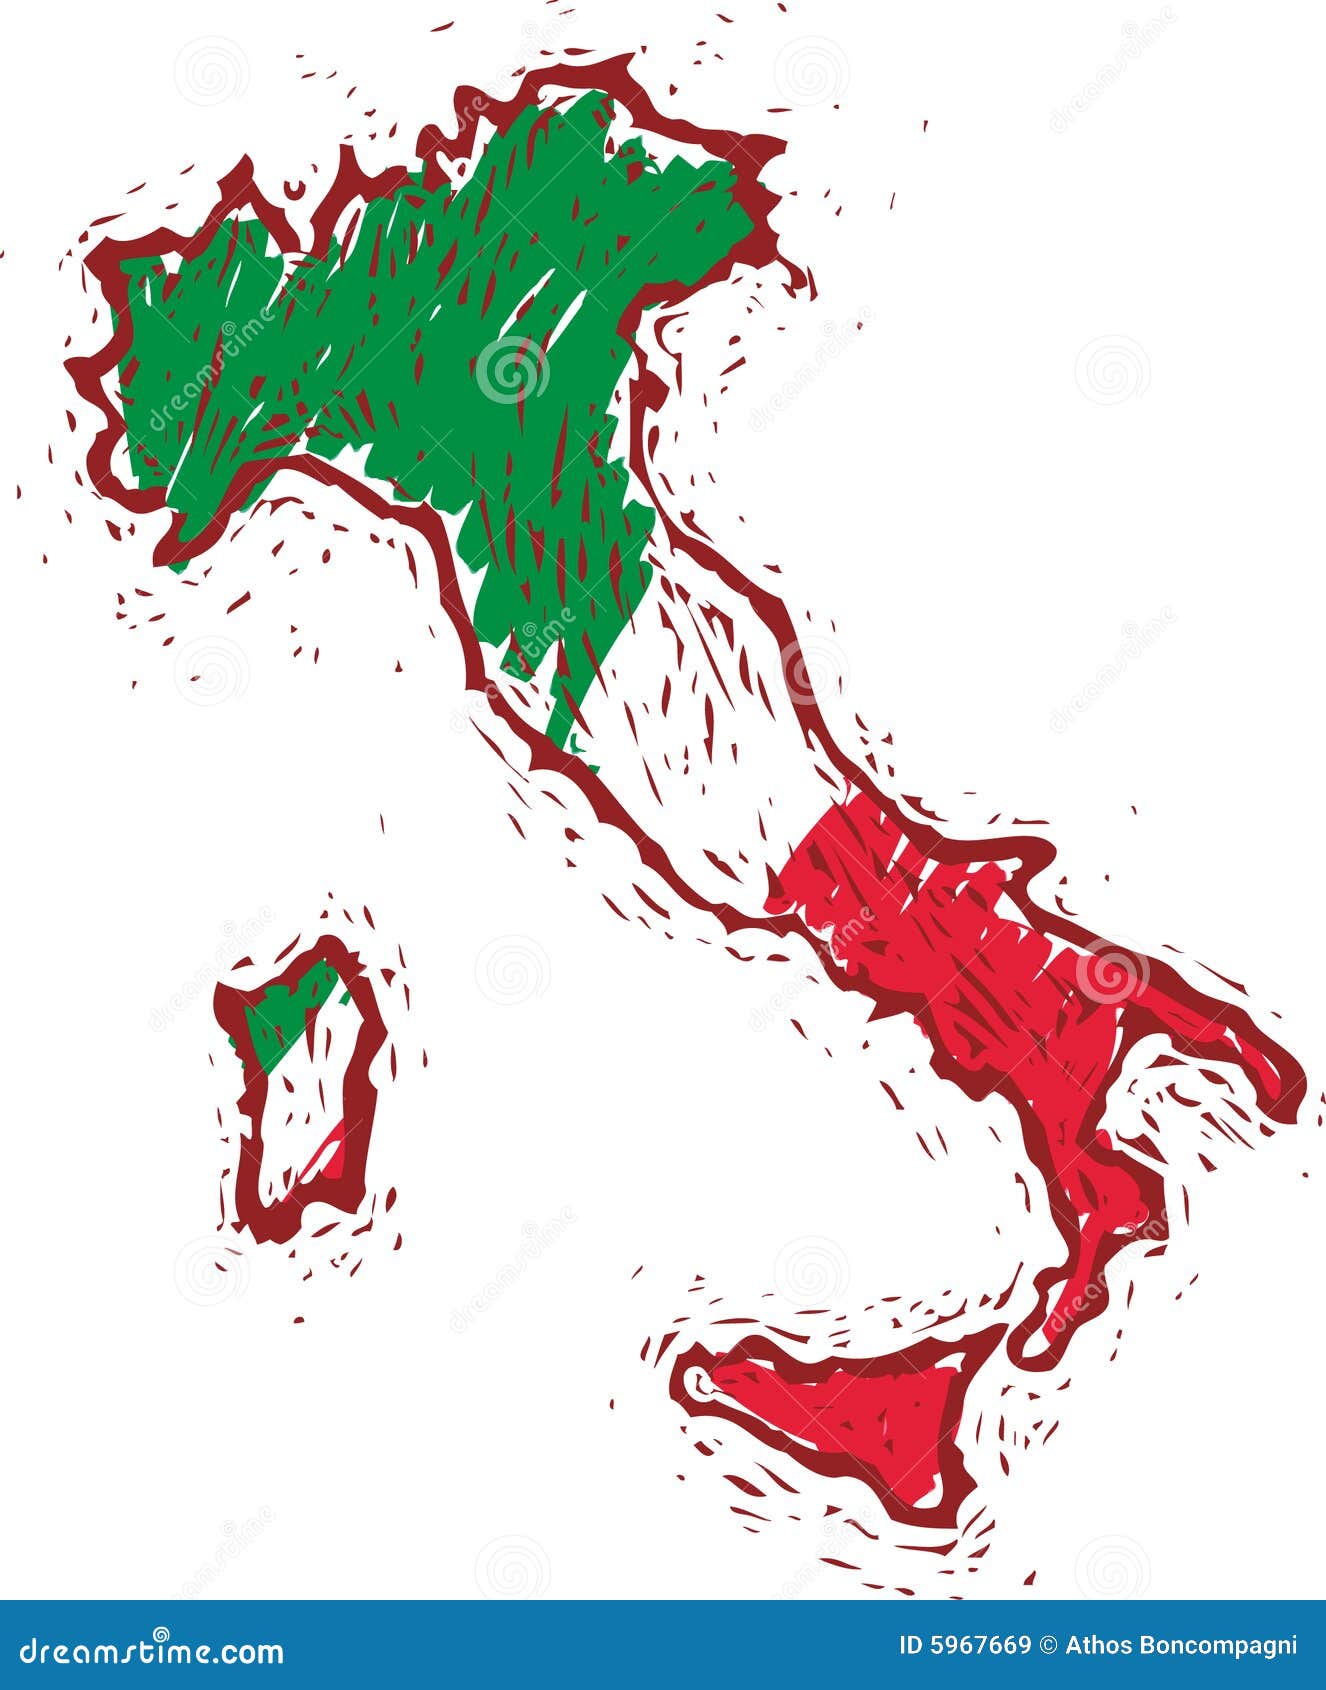 free clipart map of italy - photo #9